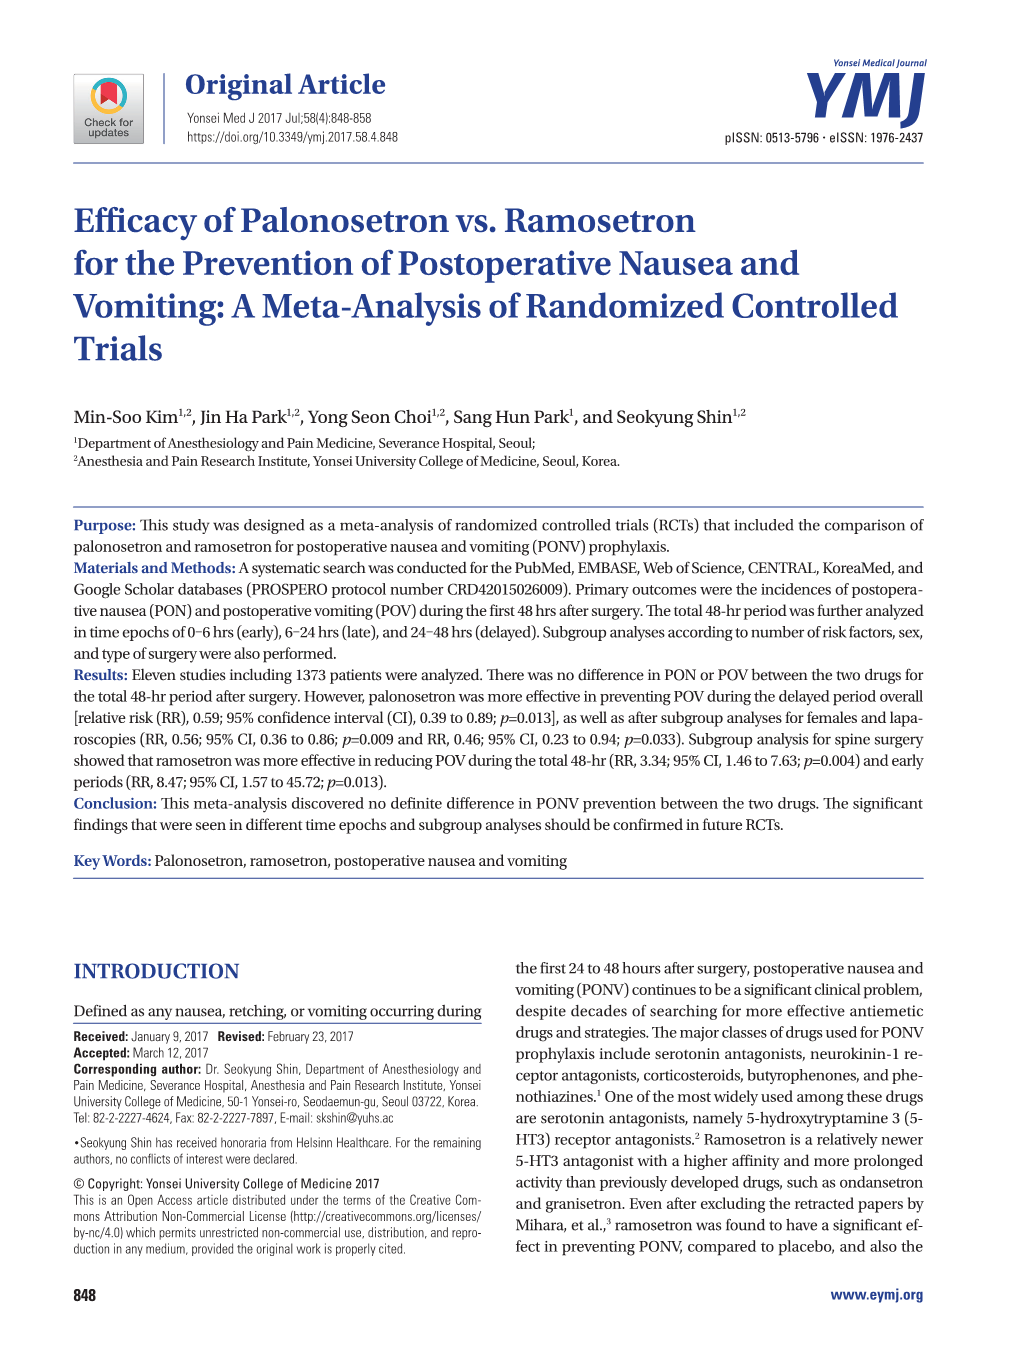 Efficacy of Palonosetron Vs. Ramosetron for the Prevention of Postoperative Nausea and Vomiting: a Meta-Analysis of Randomized Controlled Trials